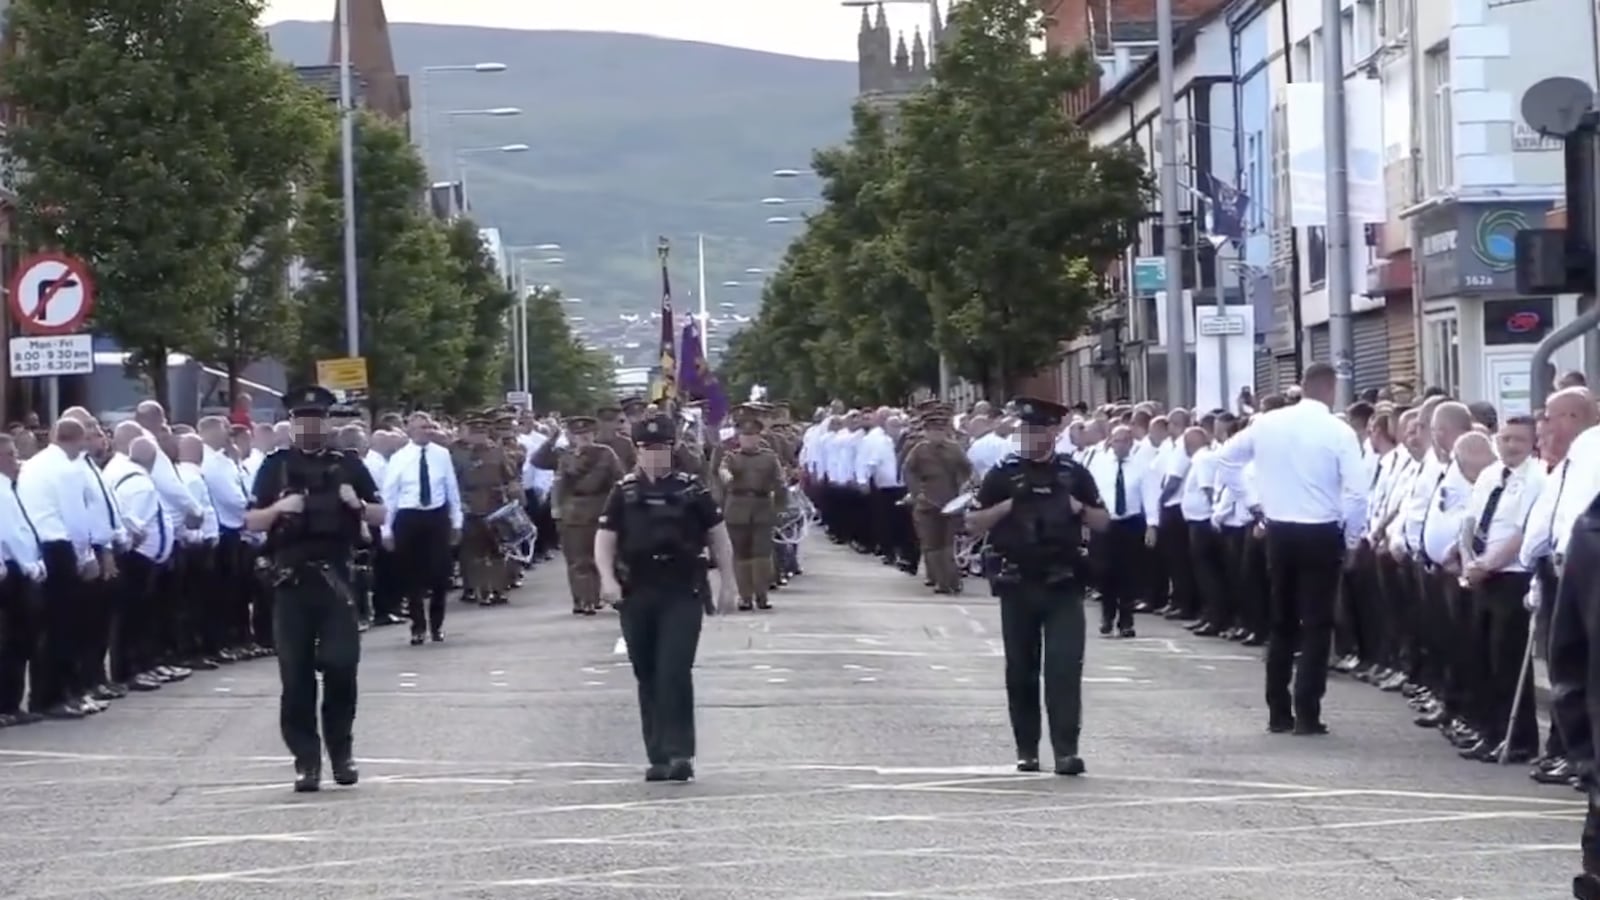 SHOW OF STRENGTH: The UVF were out in force in East Belfast over the weekend